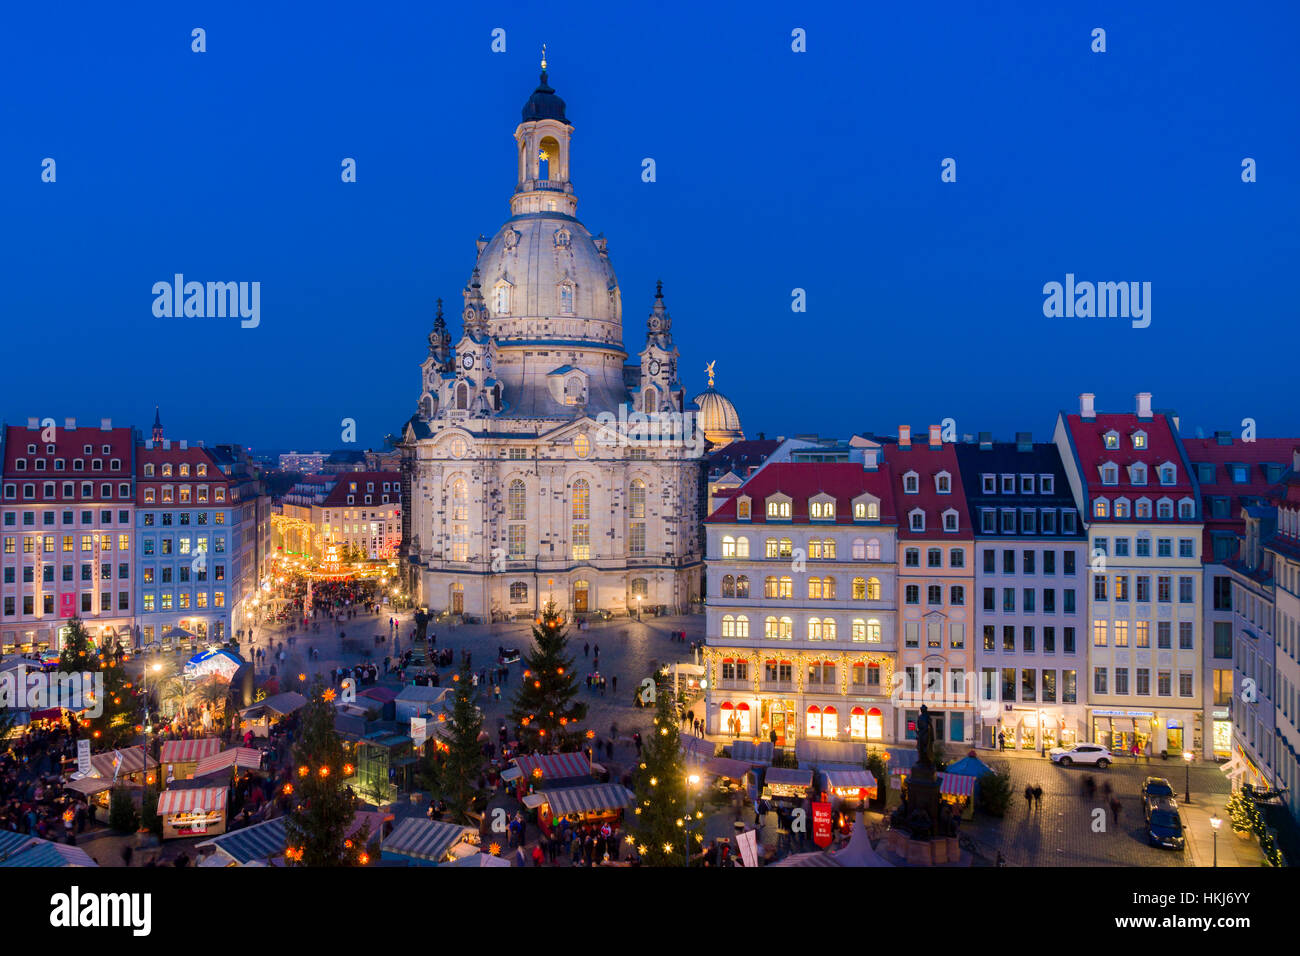 Historical Renaissance-style Christmas market at Neumarkt in front of the Church of our Lady, Dresden, Saxony, Germany Stock Photo